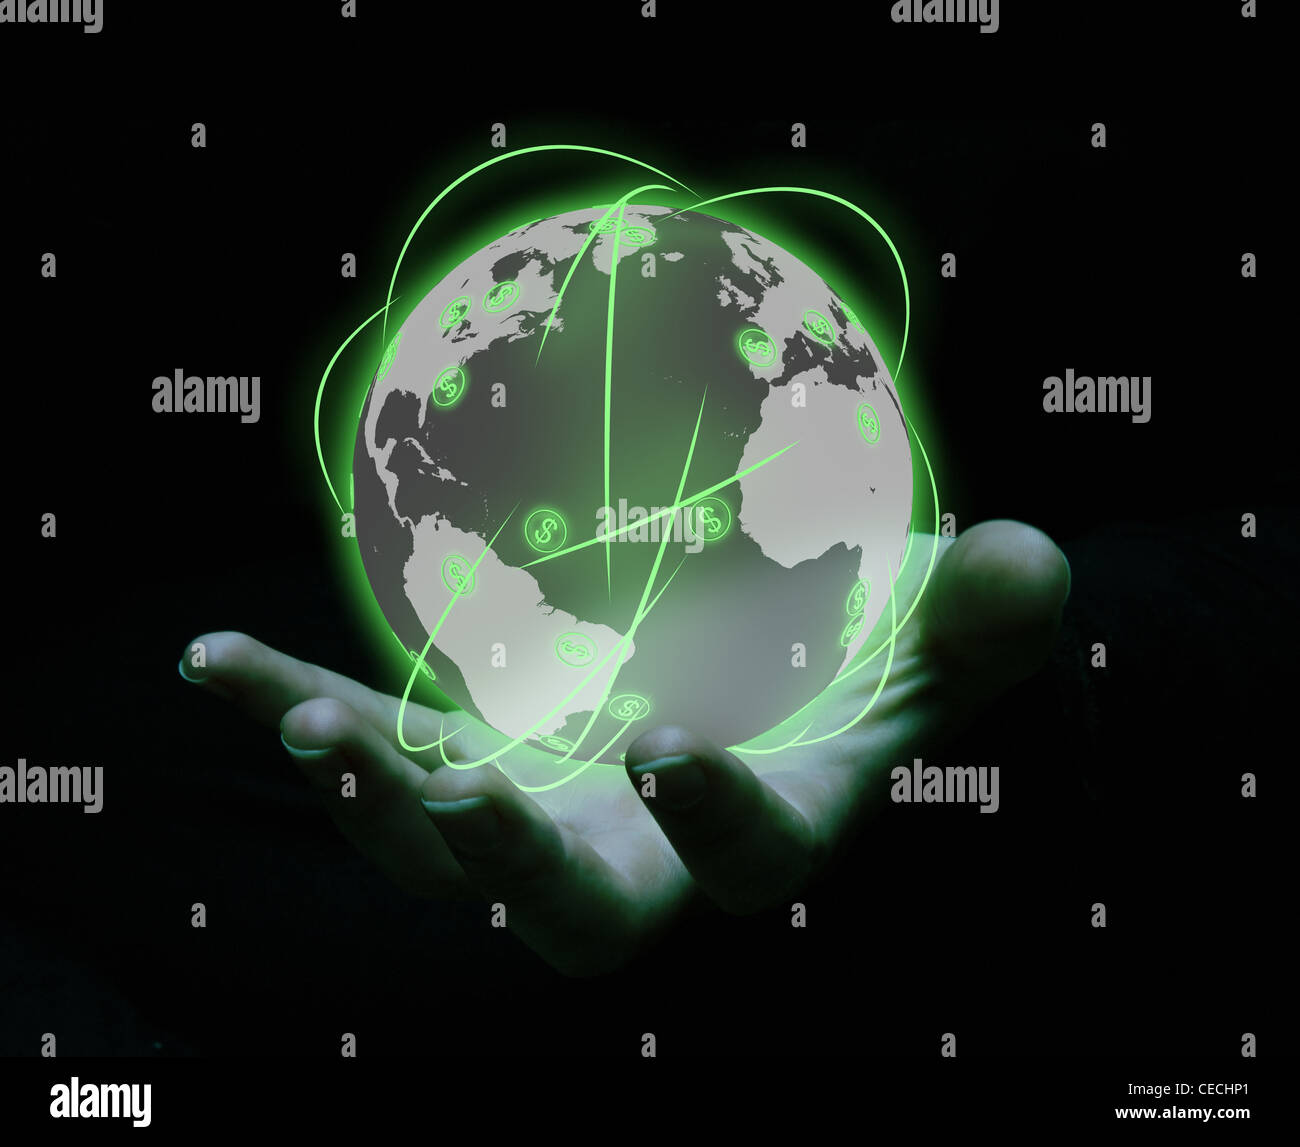 render of a global finance network or global economy Stock Photo